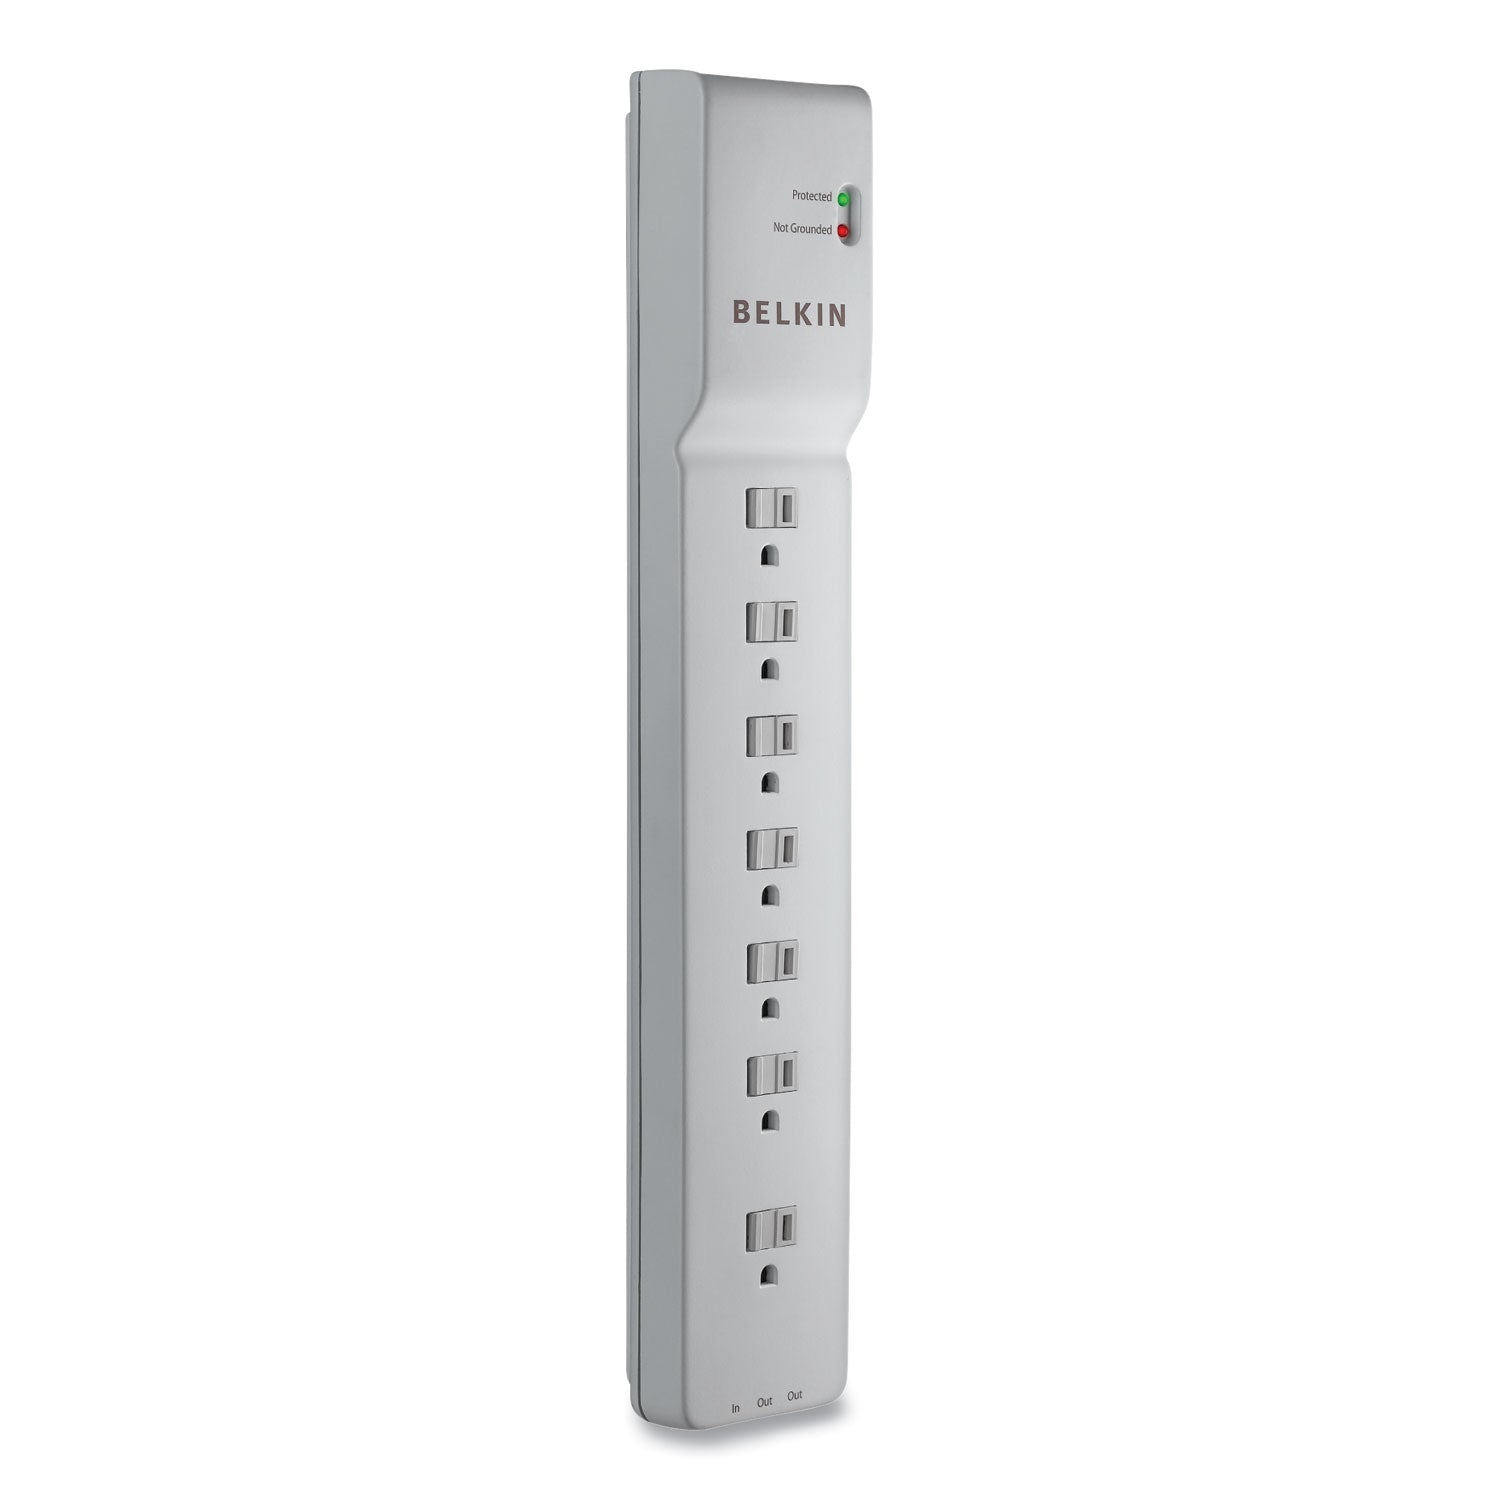 Home/Office Surge Protector, 7 AC Outlets, 12 ft Cord, 2,160 J, White - 